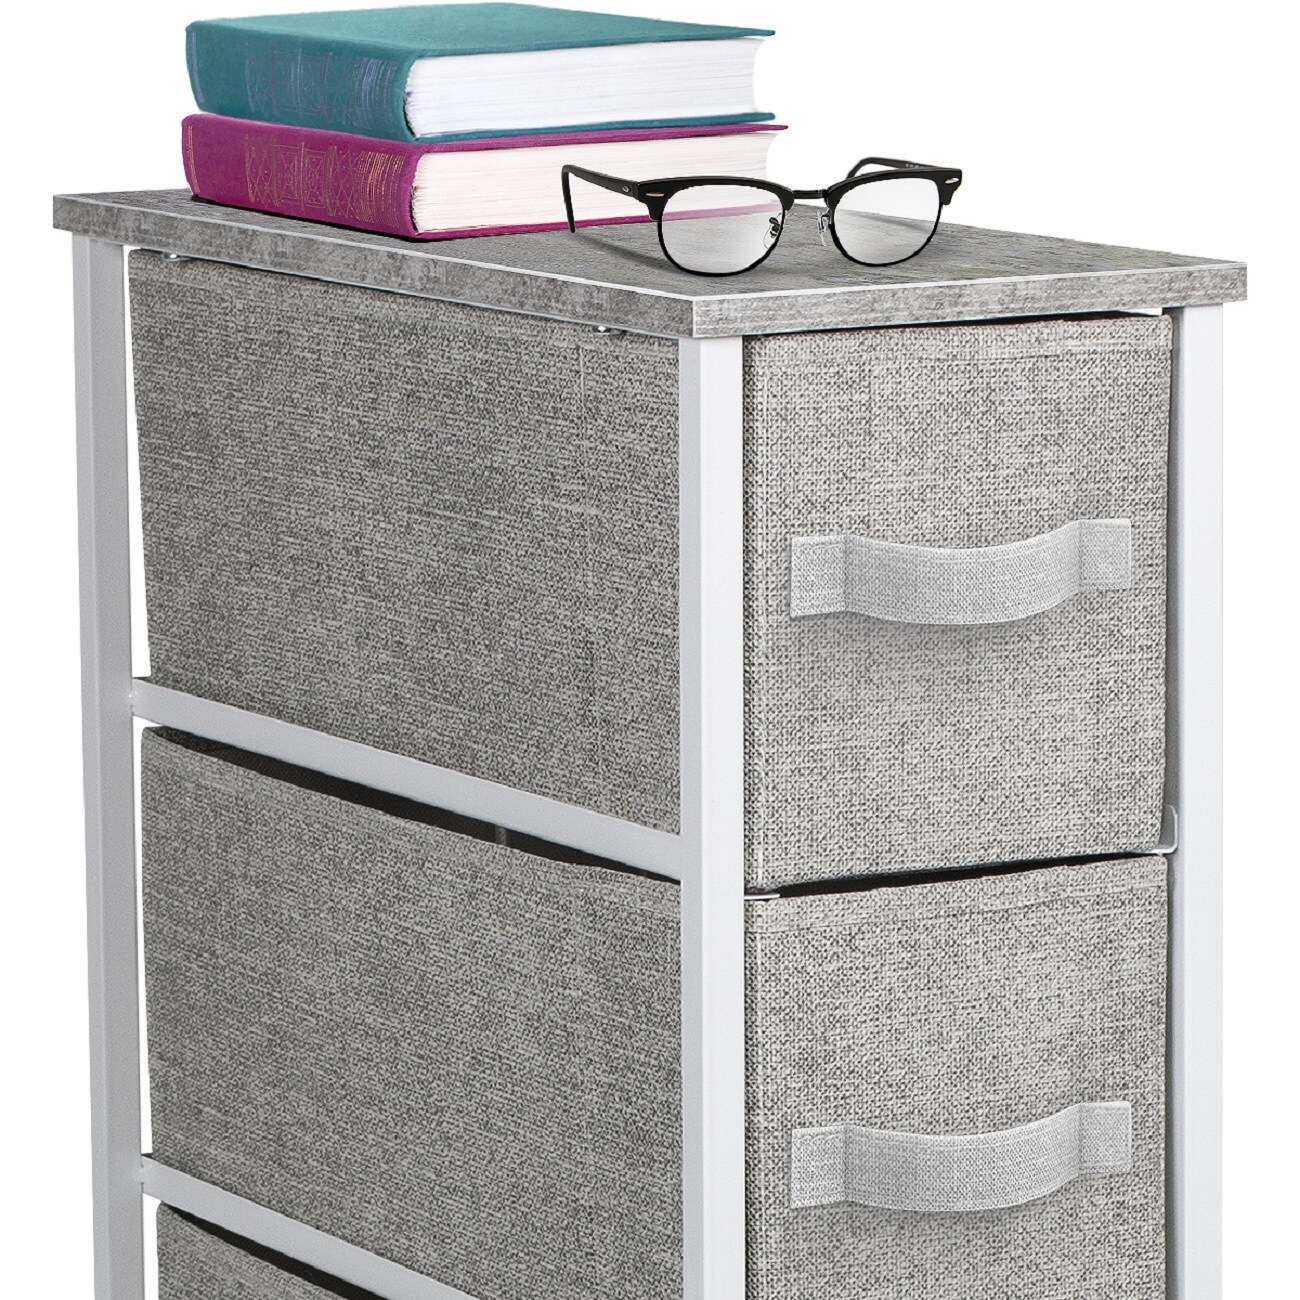 Sorbus 4 Drawers Narrow Dresser - with Steel Frame, Wood Top &#x26; Easy Pull Fabric Bins for Small Spaces, Closets, Bedroom, Bathroom &#x26; Laundry